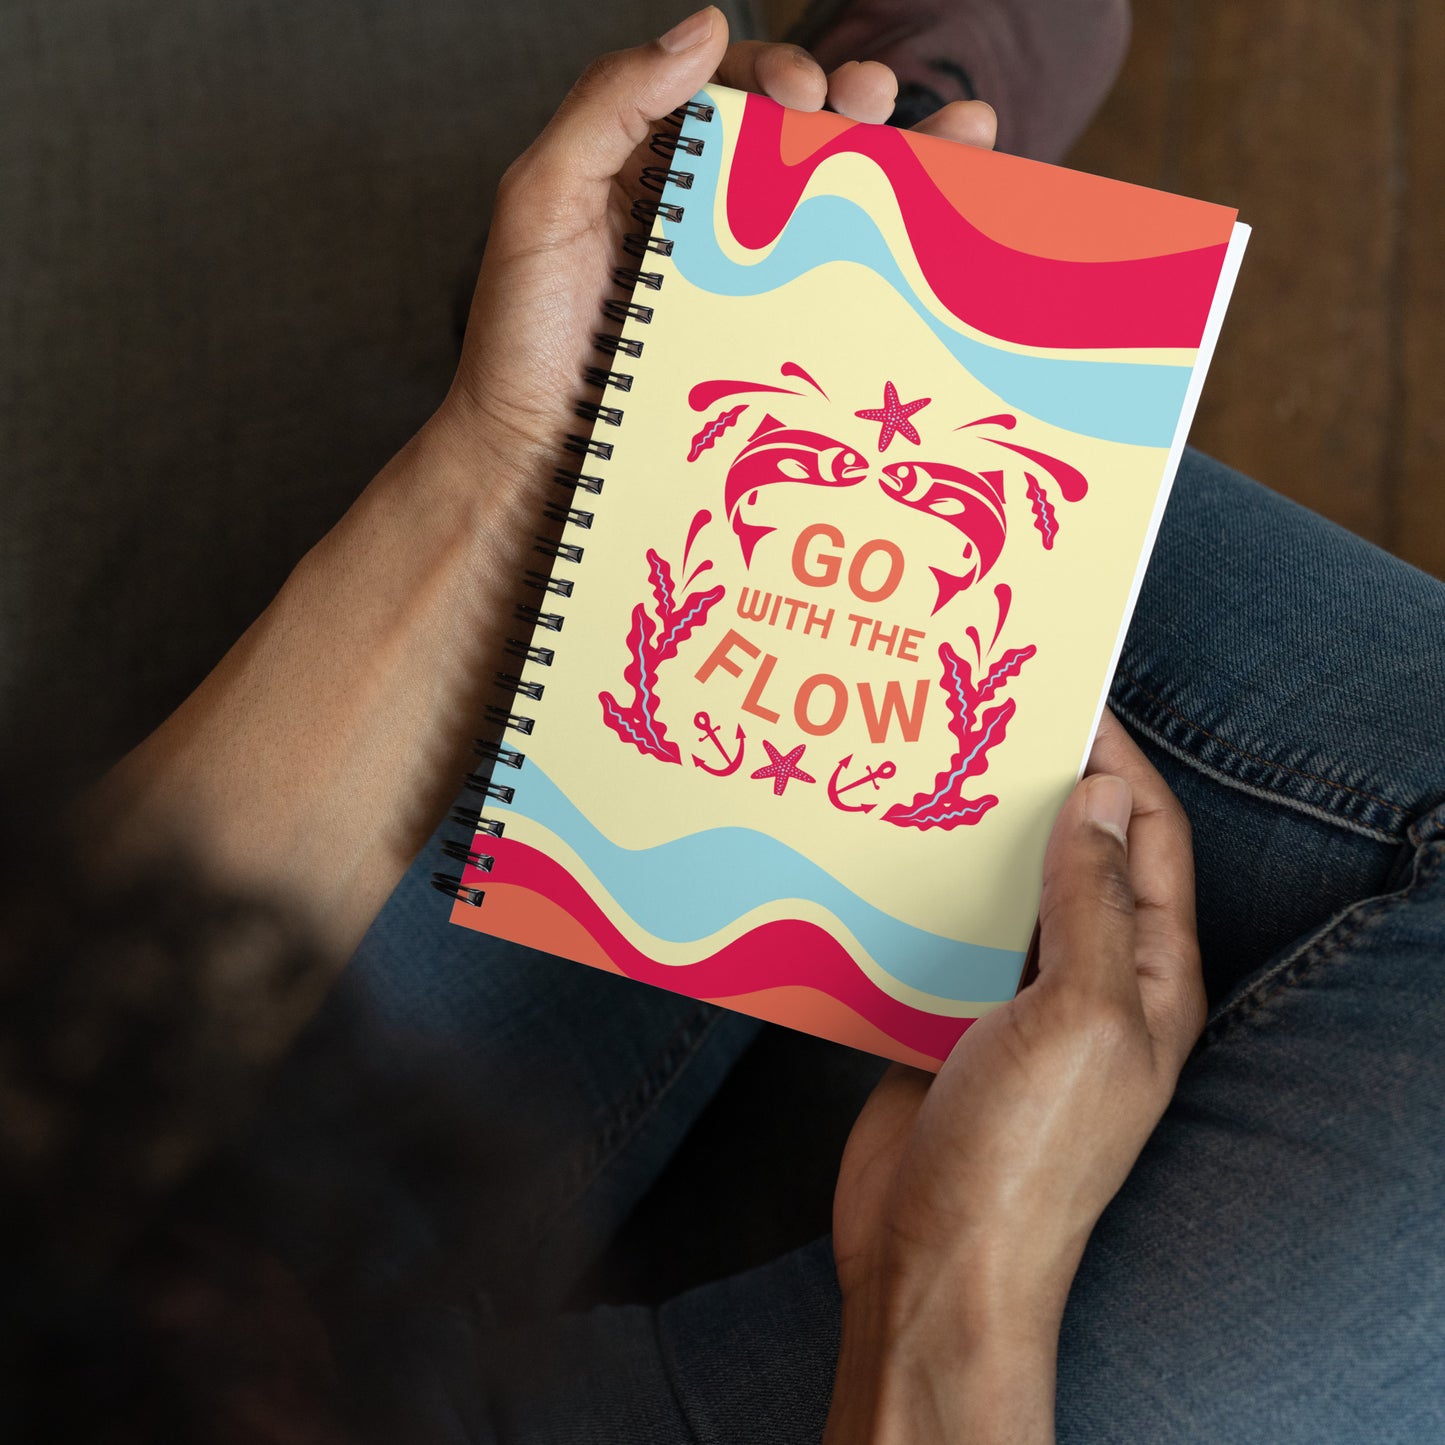 "Go With The Flow" | Spiral notebook